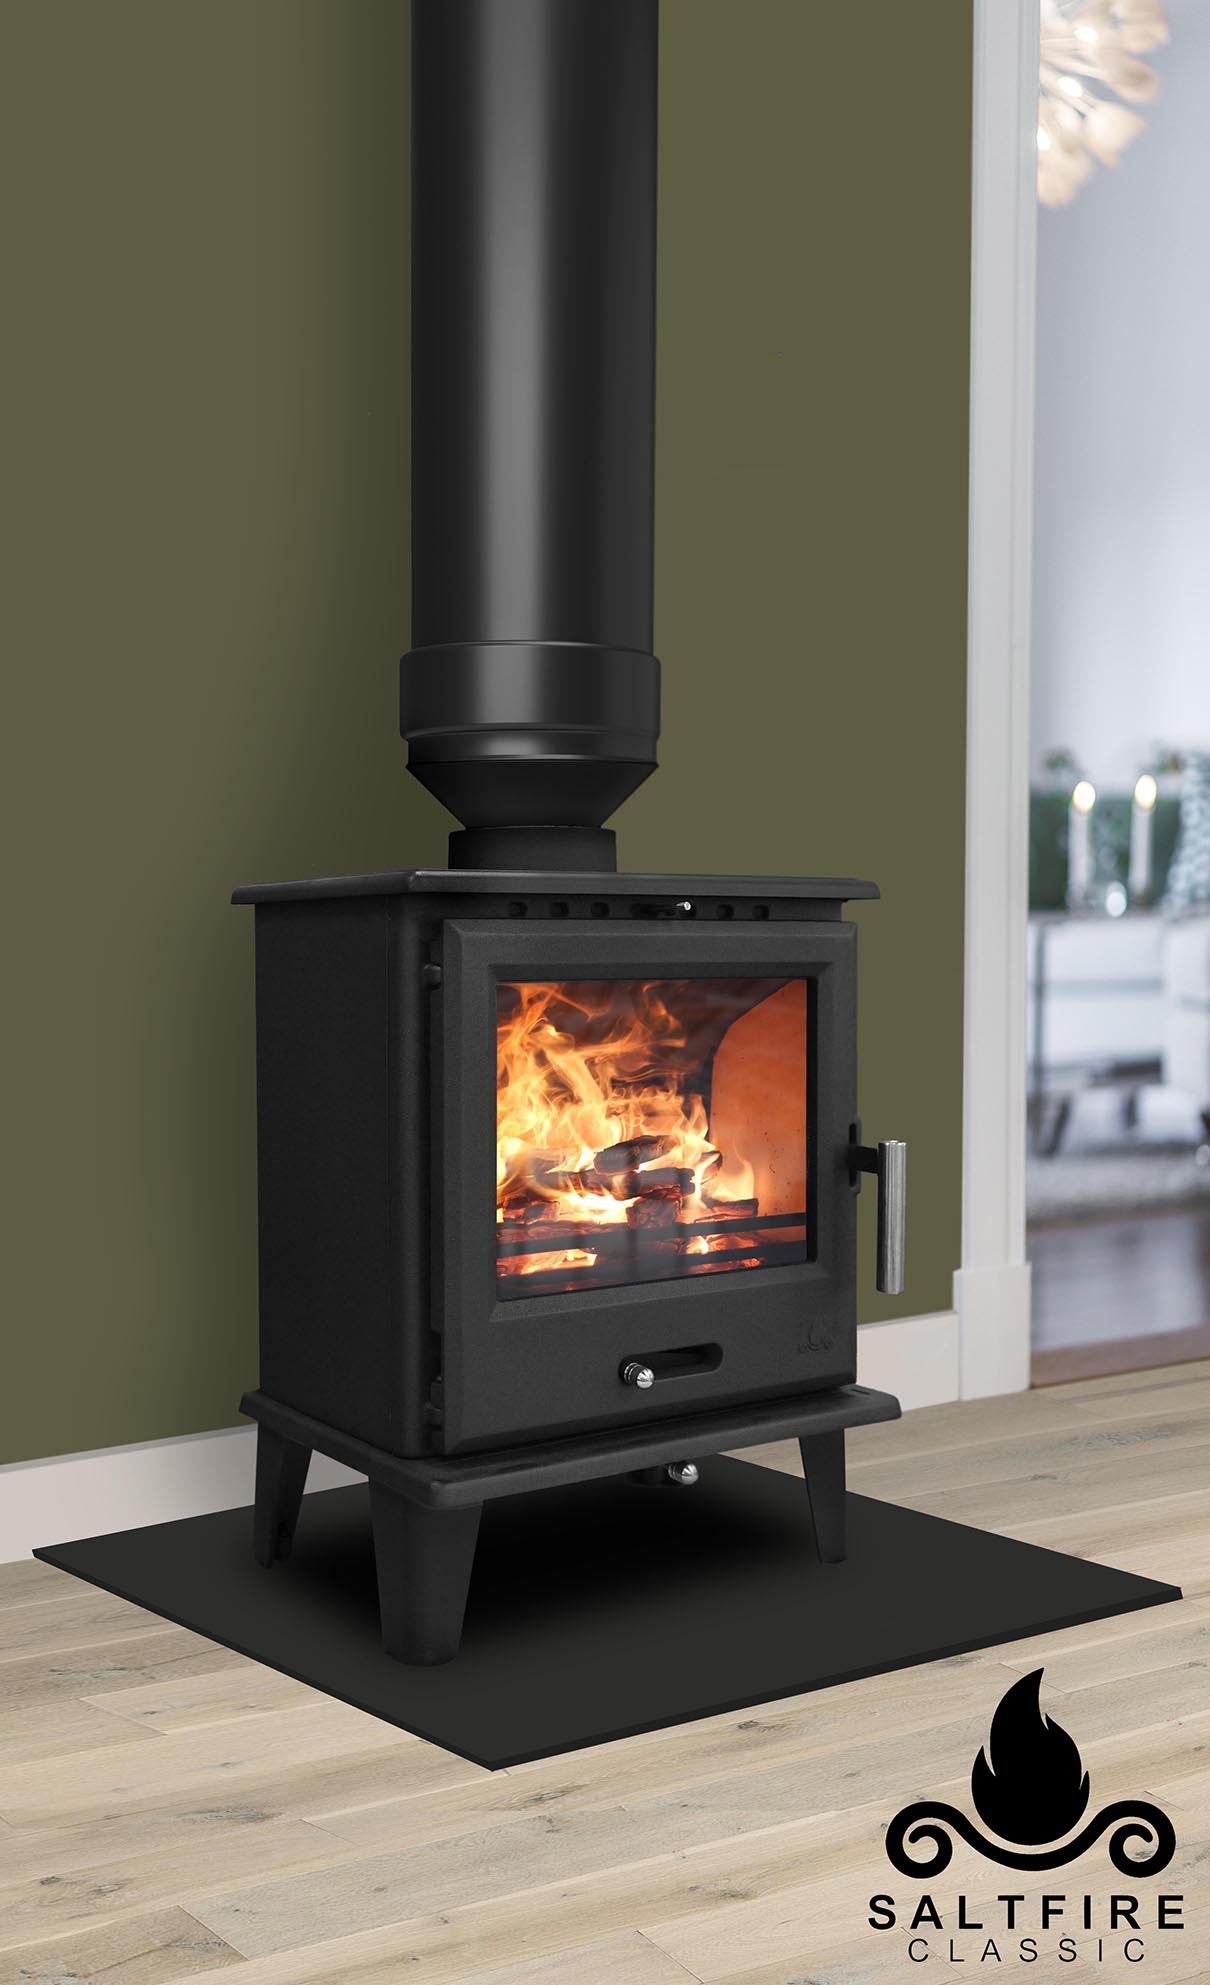 The Saltfire classic multifuel stove has top and rear outlets for the flue